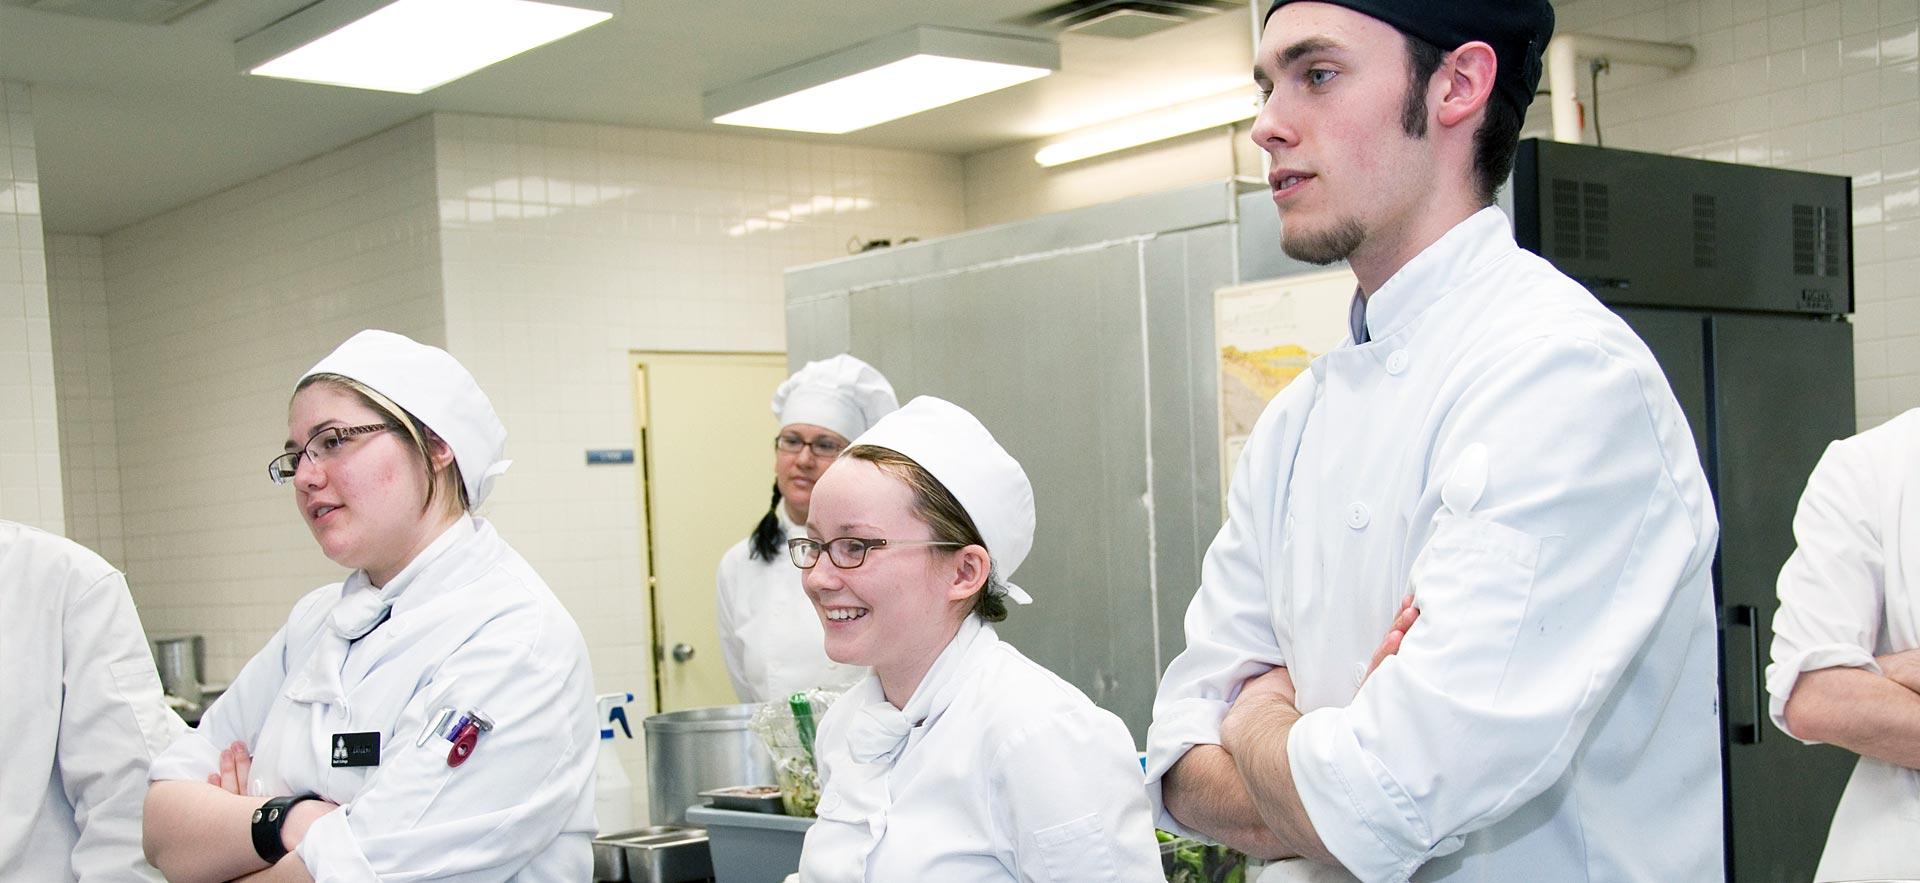 A group of culinary students listen to their instructor in one the о culinary kitchens.